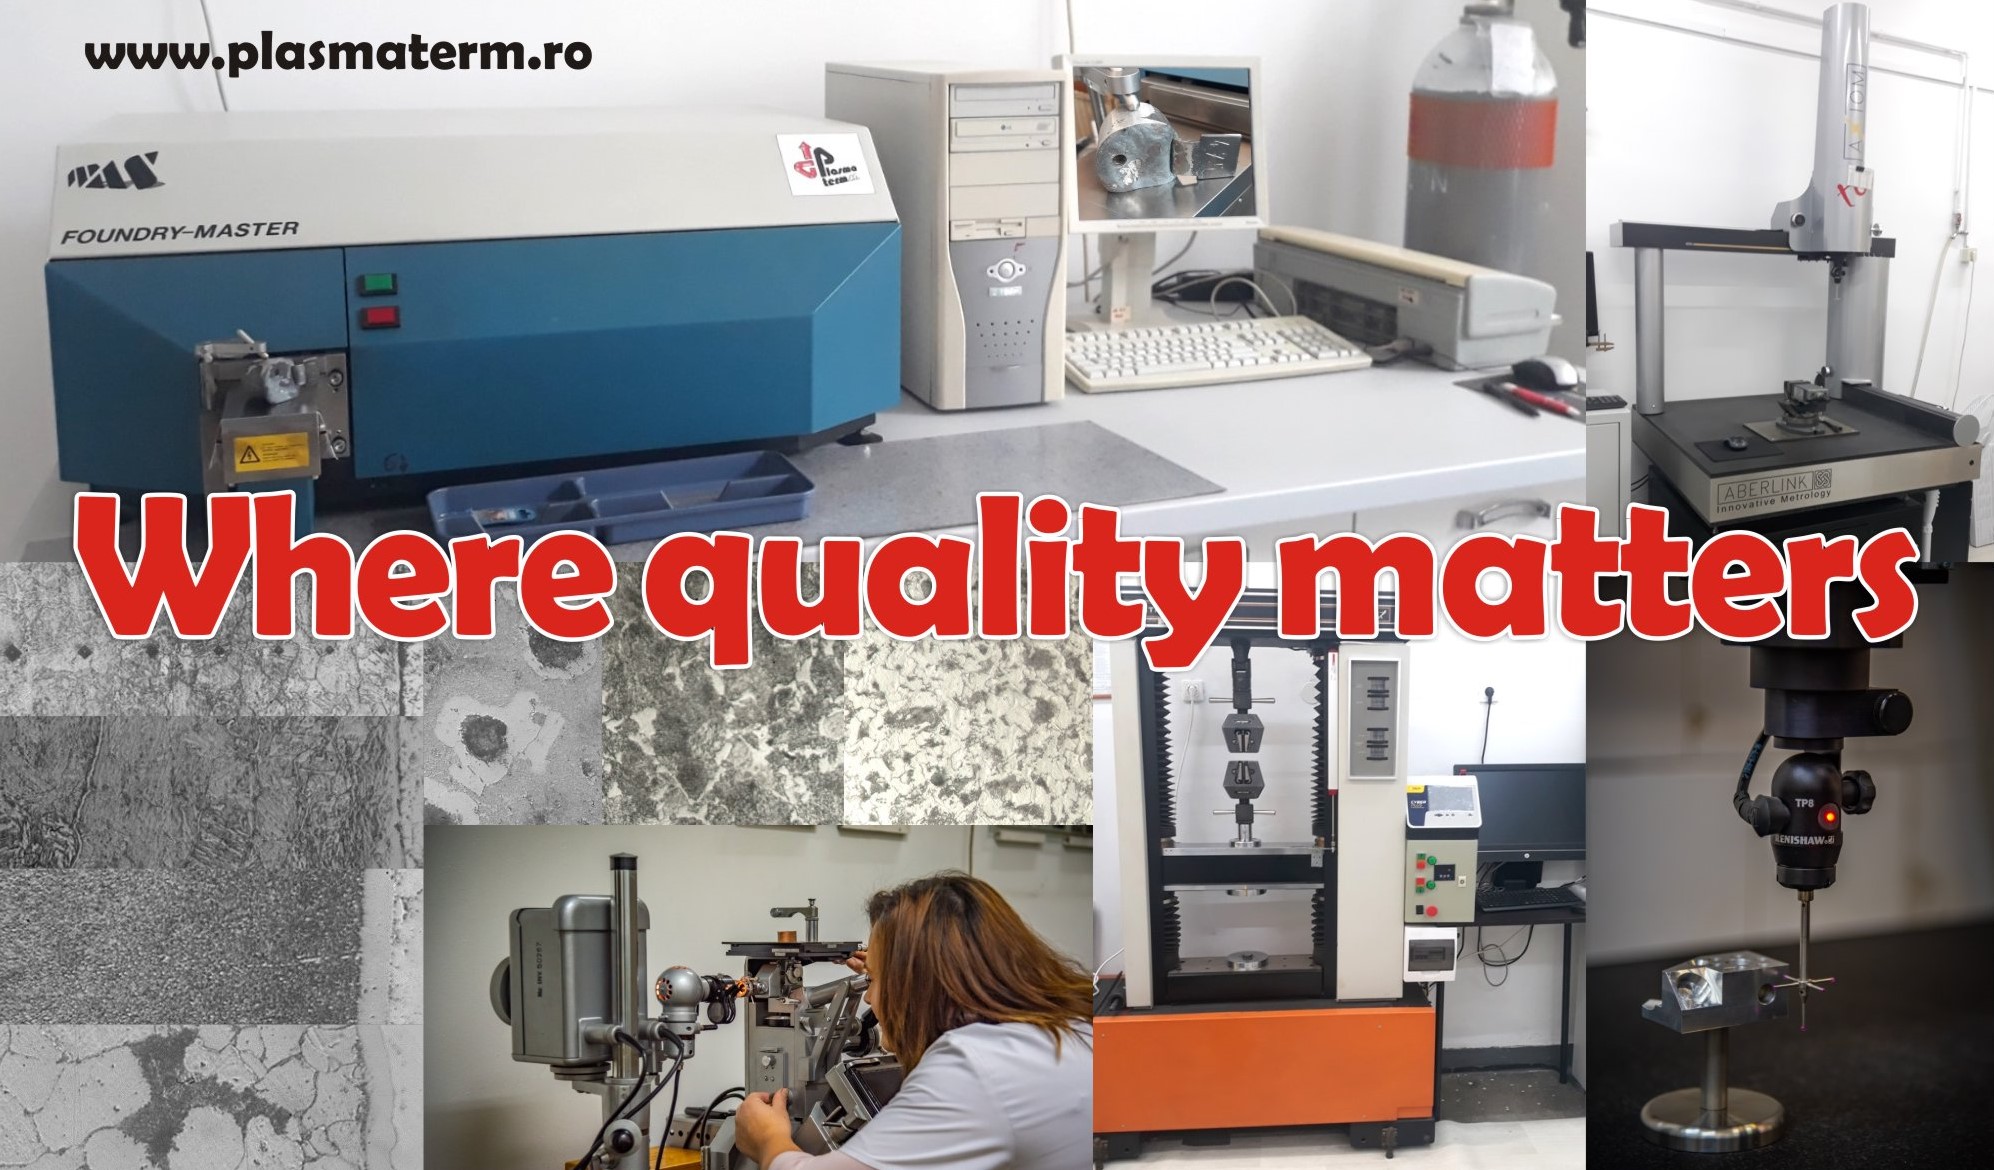 Where quality matters!